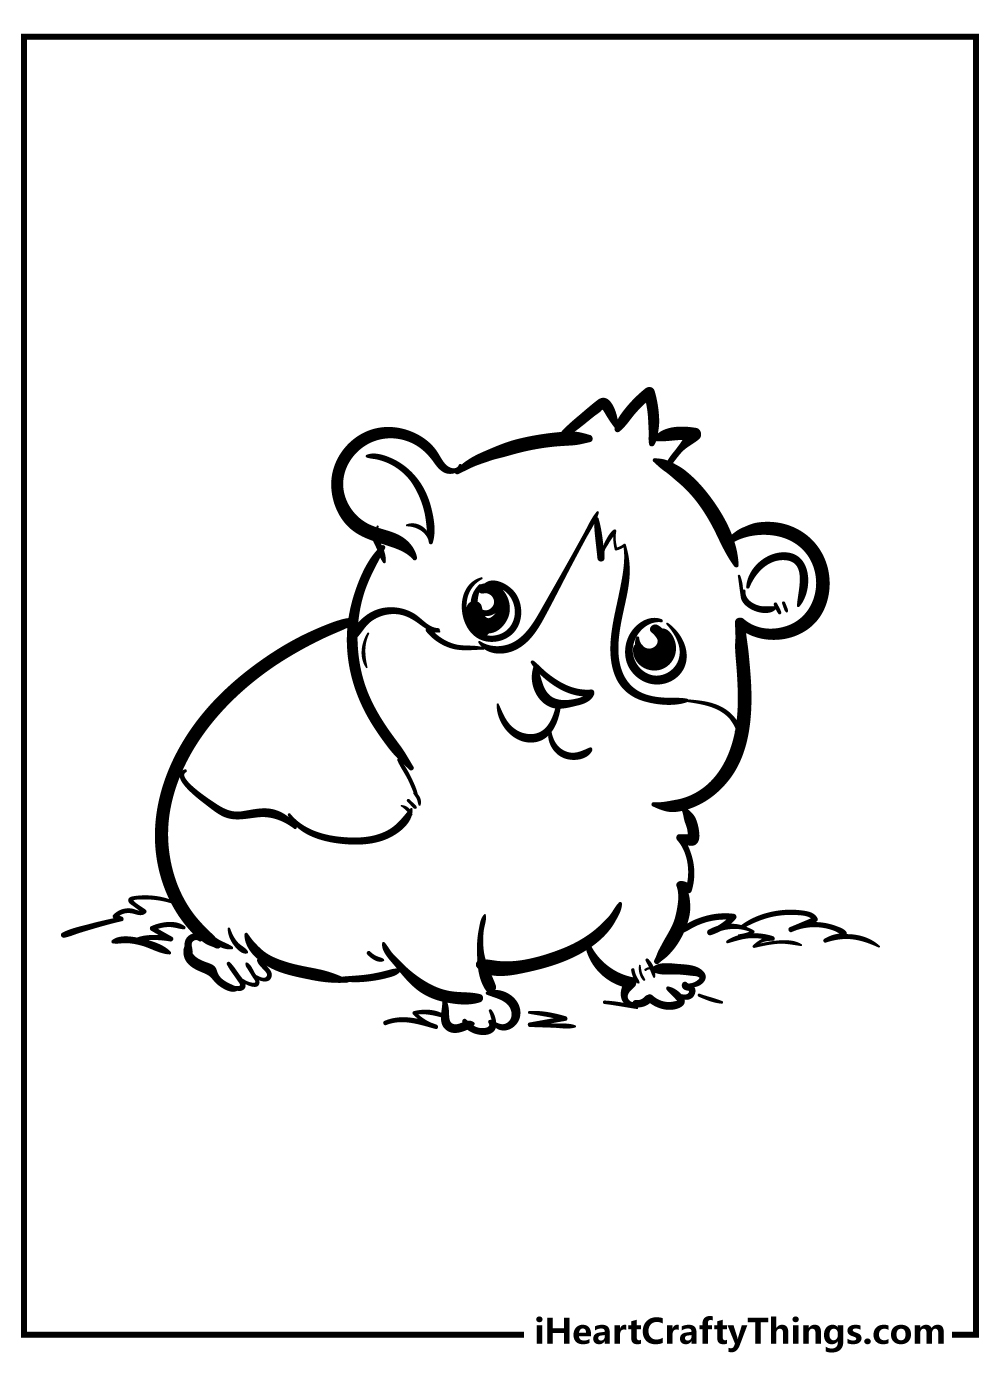 Hamster Coloring Book for kids free printable